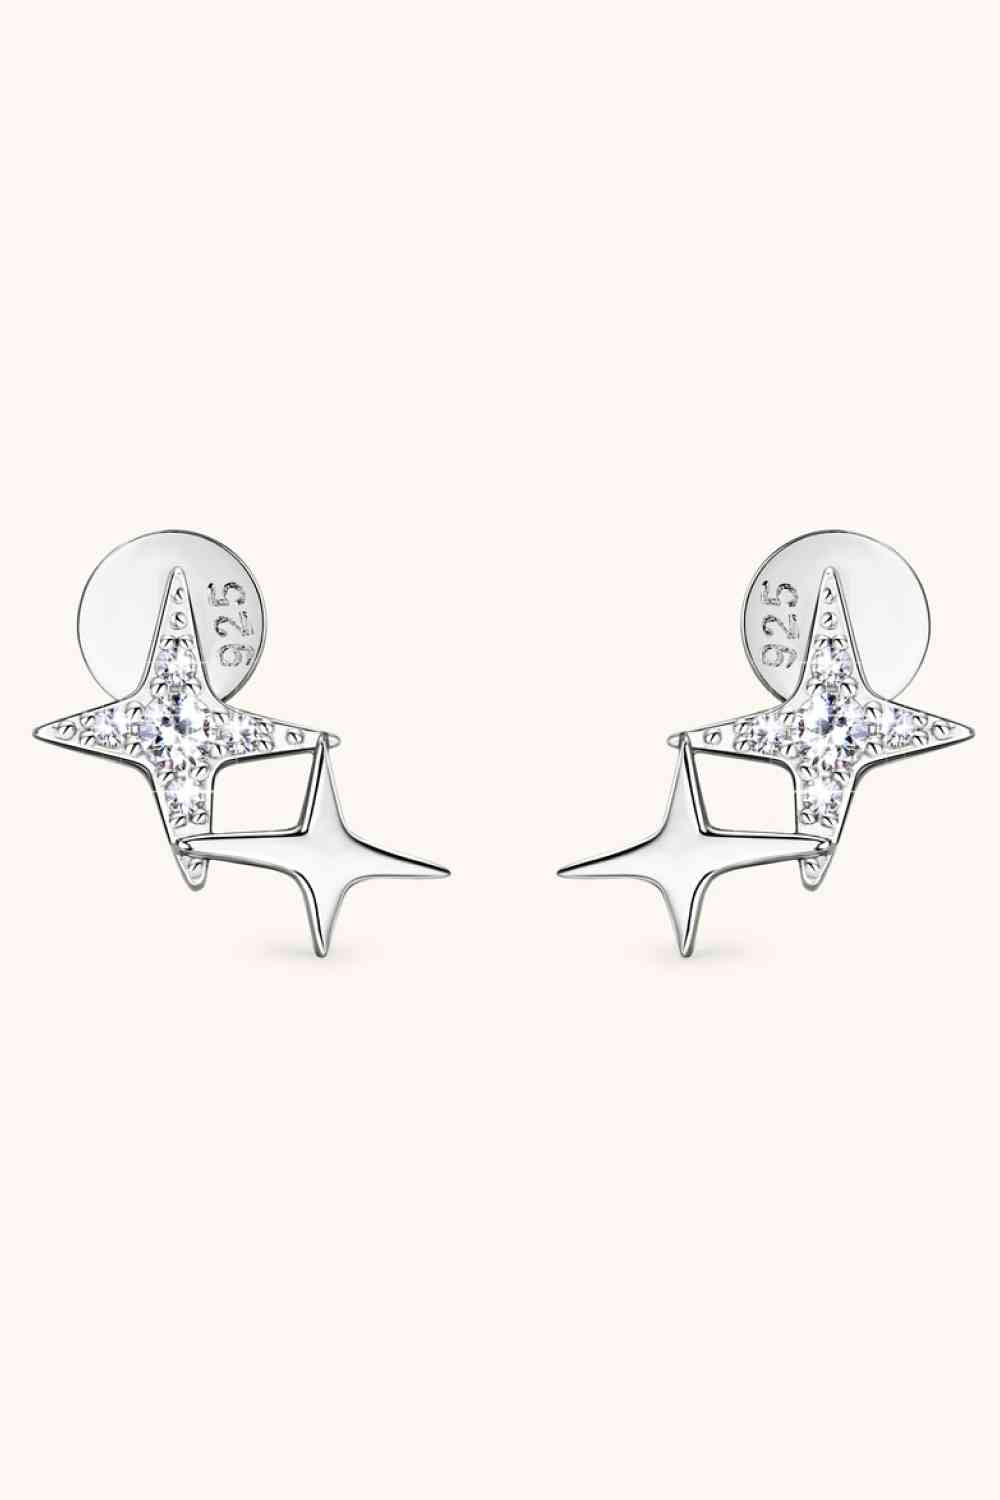 Moissanite 925 Sterling Silver Star Shape Earrings - Shop Tophatter Deals, Electronics, Fashion, Jewelry, Health, Beauty, Home Decor, Free Shipping